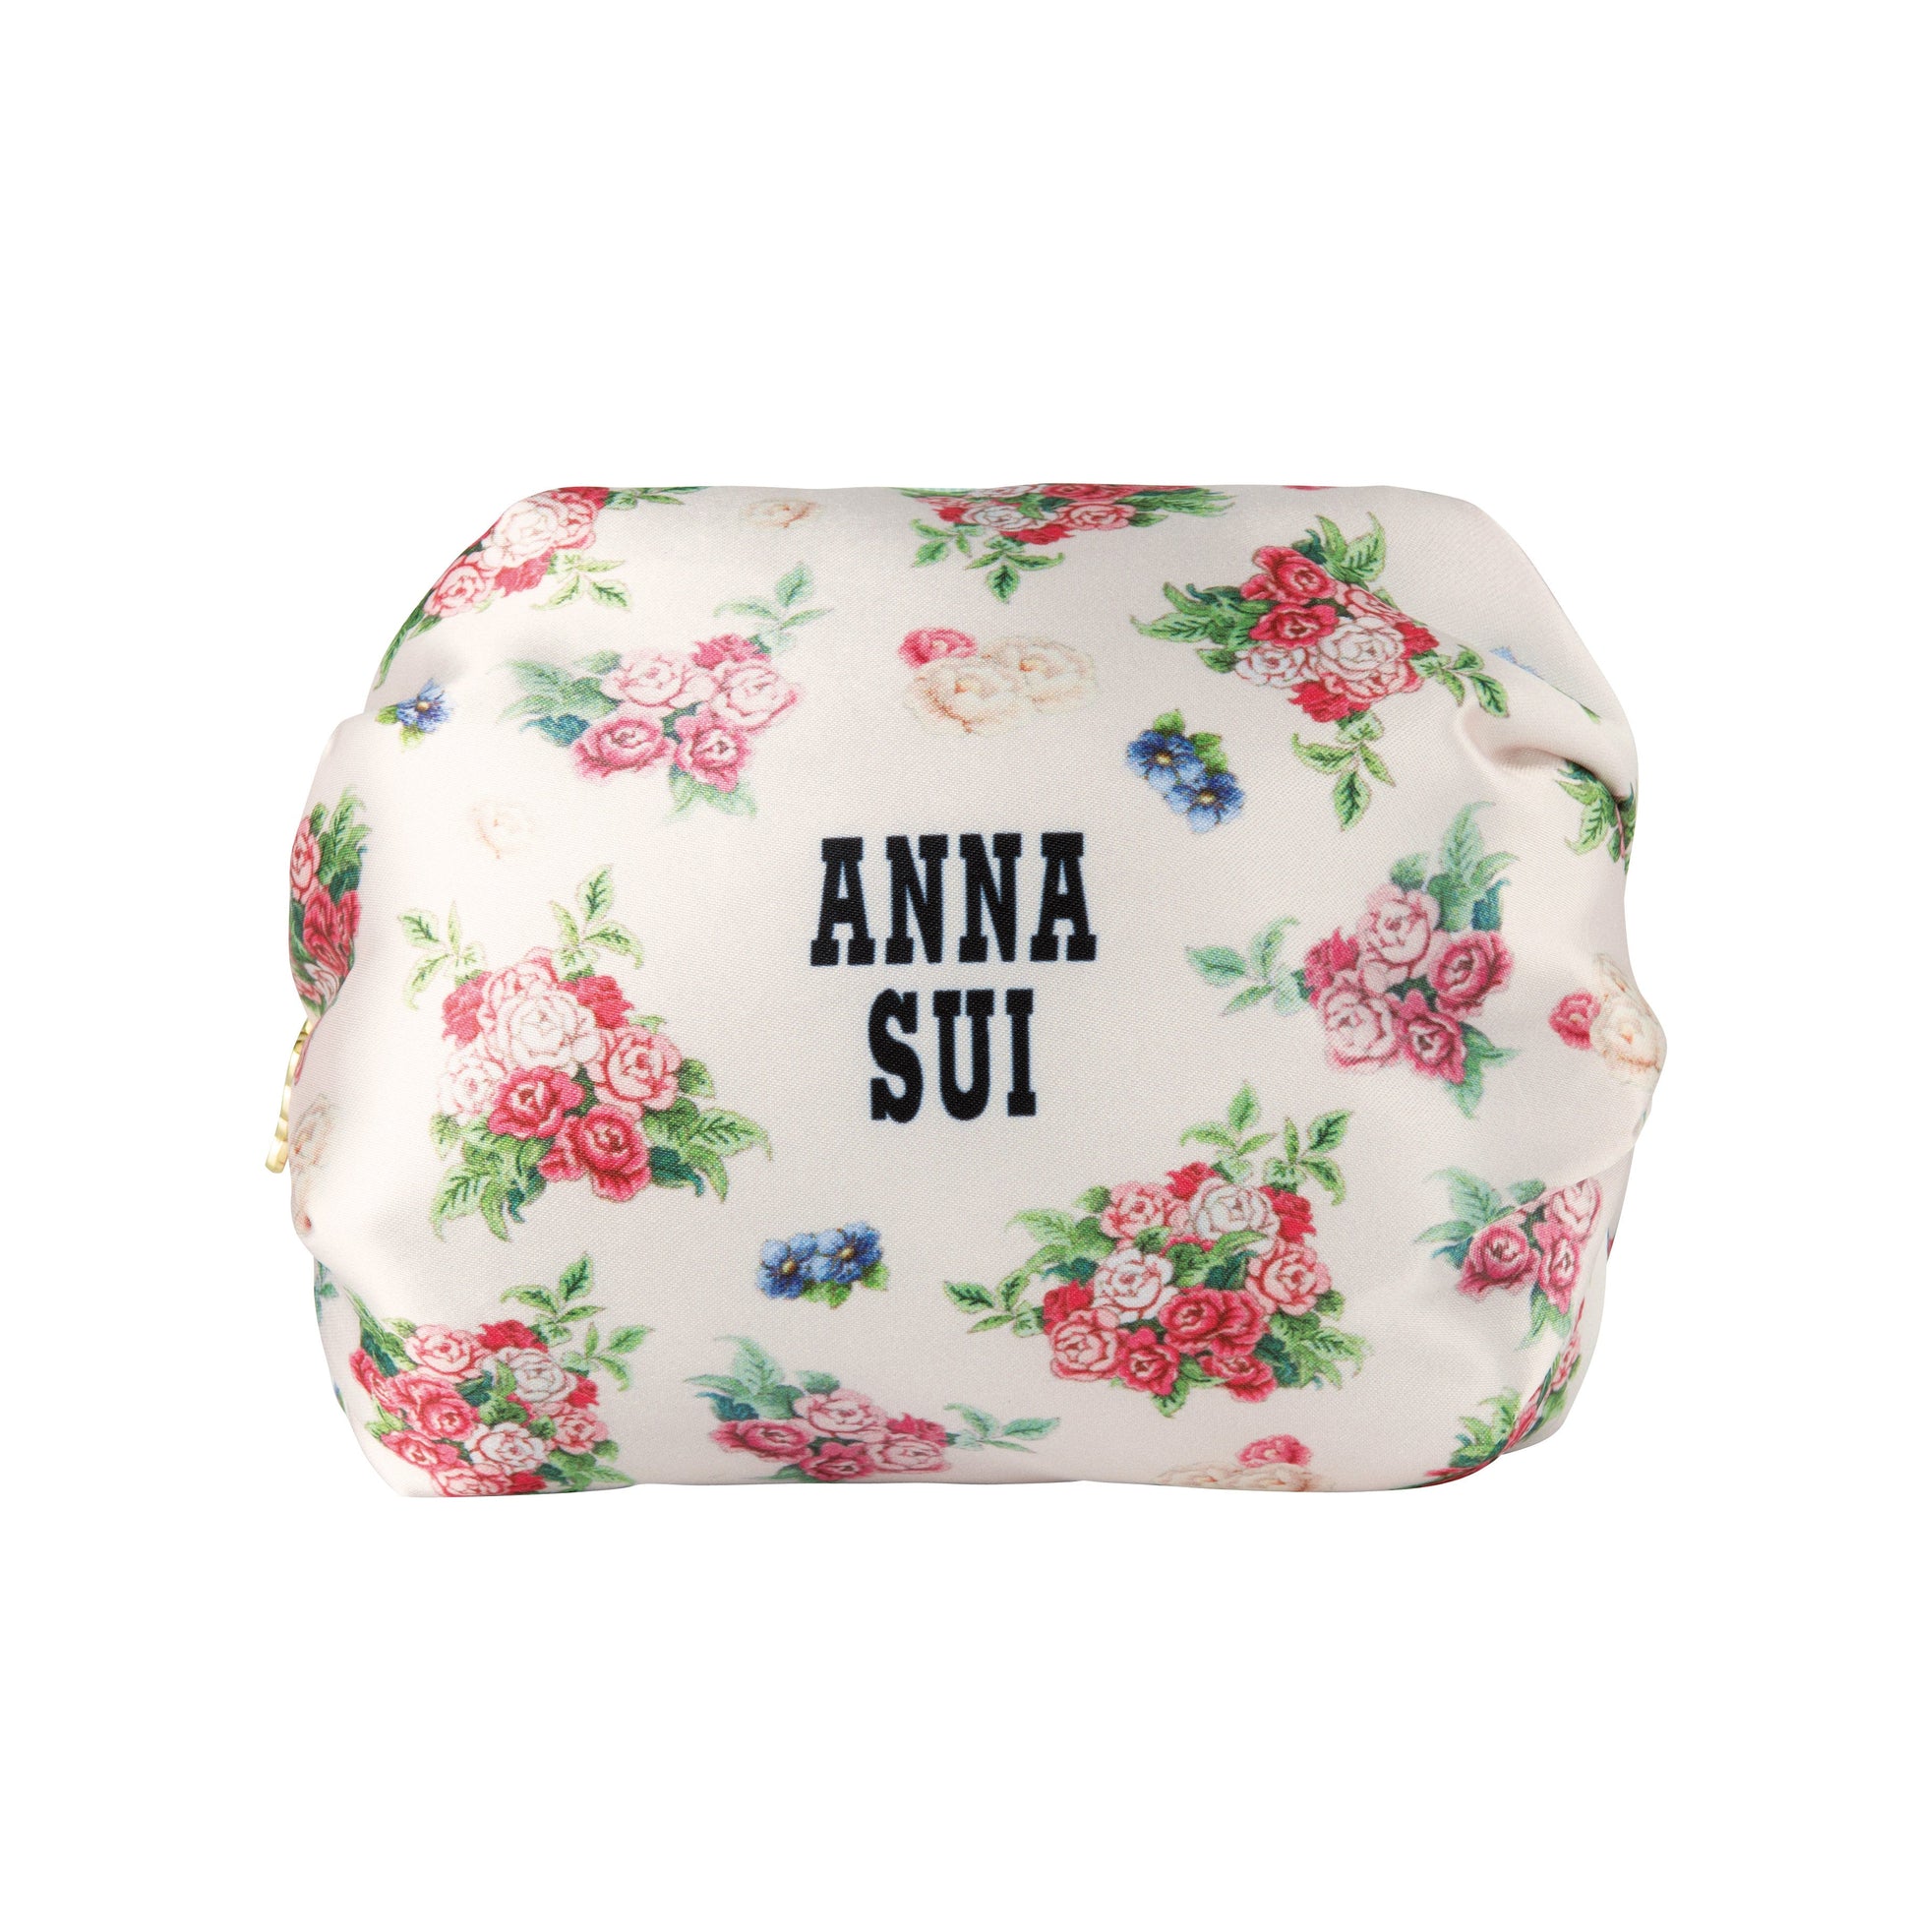 FREE Cosmetic Bag with this set, beige with rosy floral design, Anna Sui label on it, zipper on top